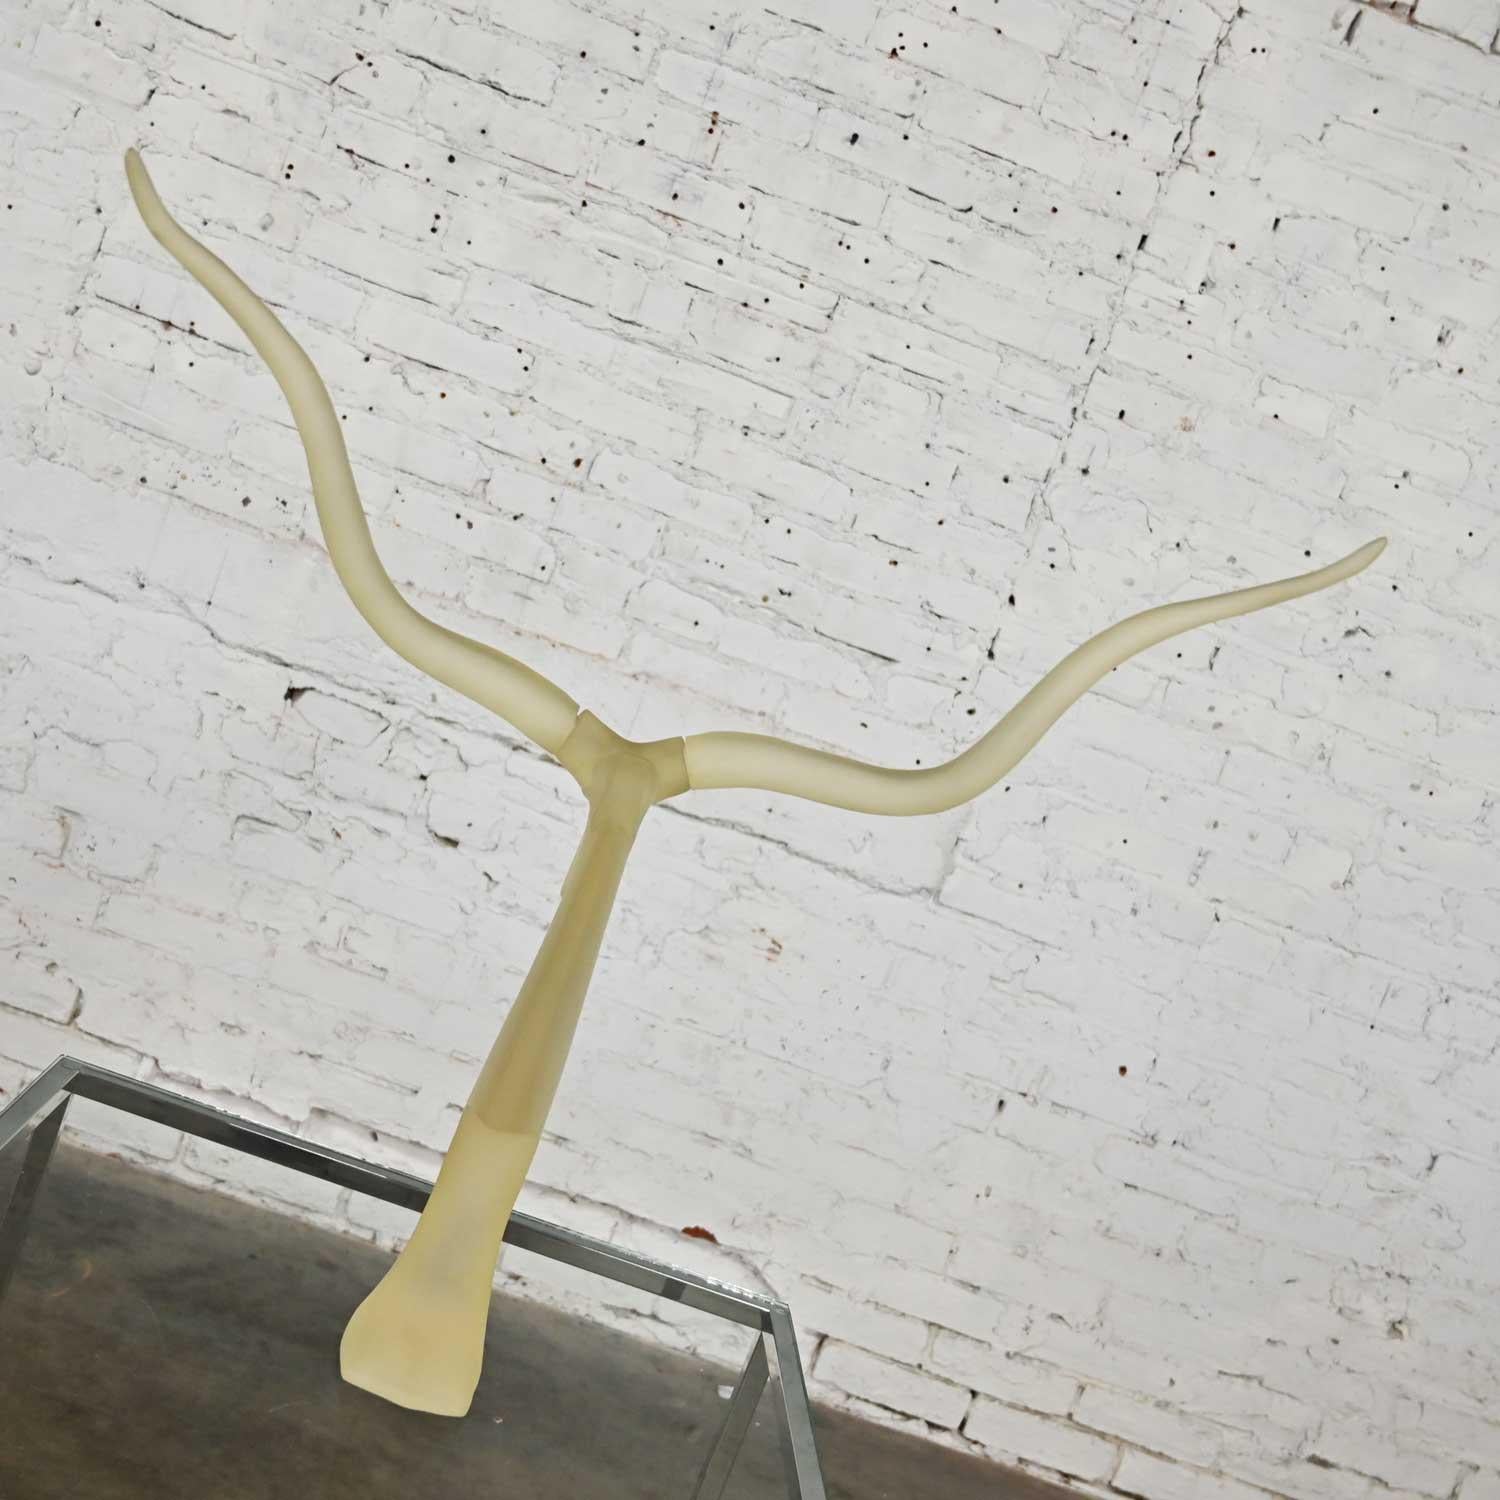 20th Century Vintage Modern Frosted Lucite Kudu Sculpture David Fisher for Austin Sculptures For Sale